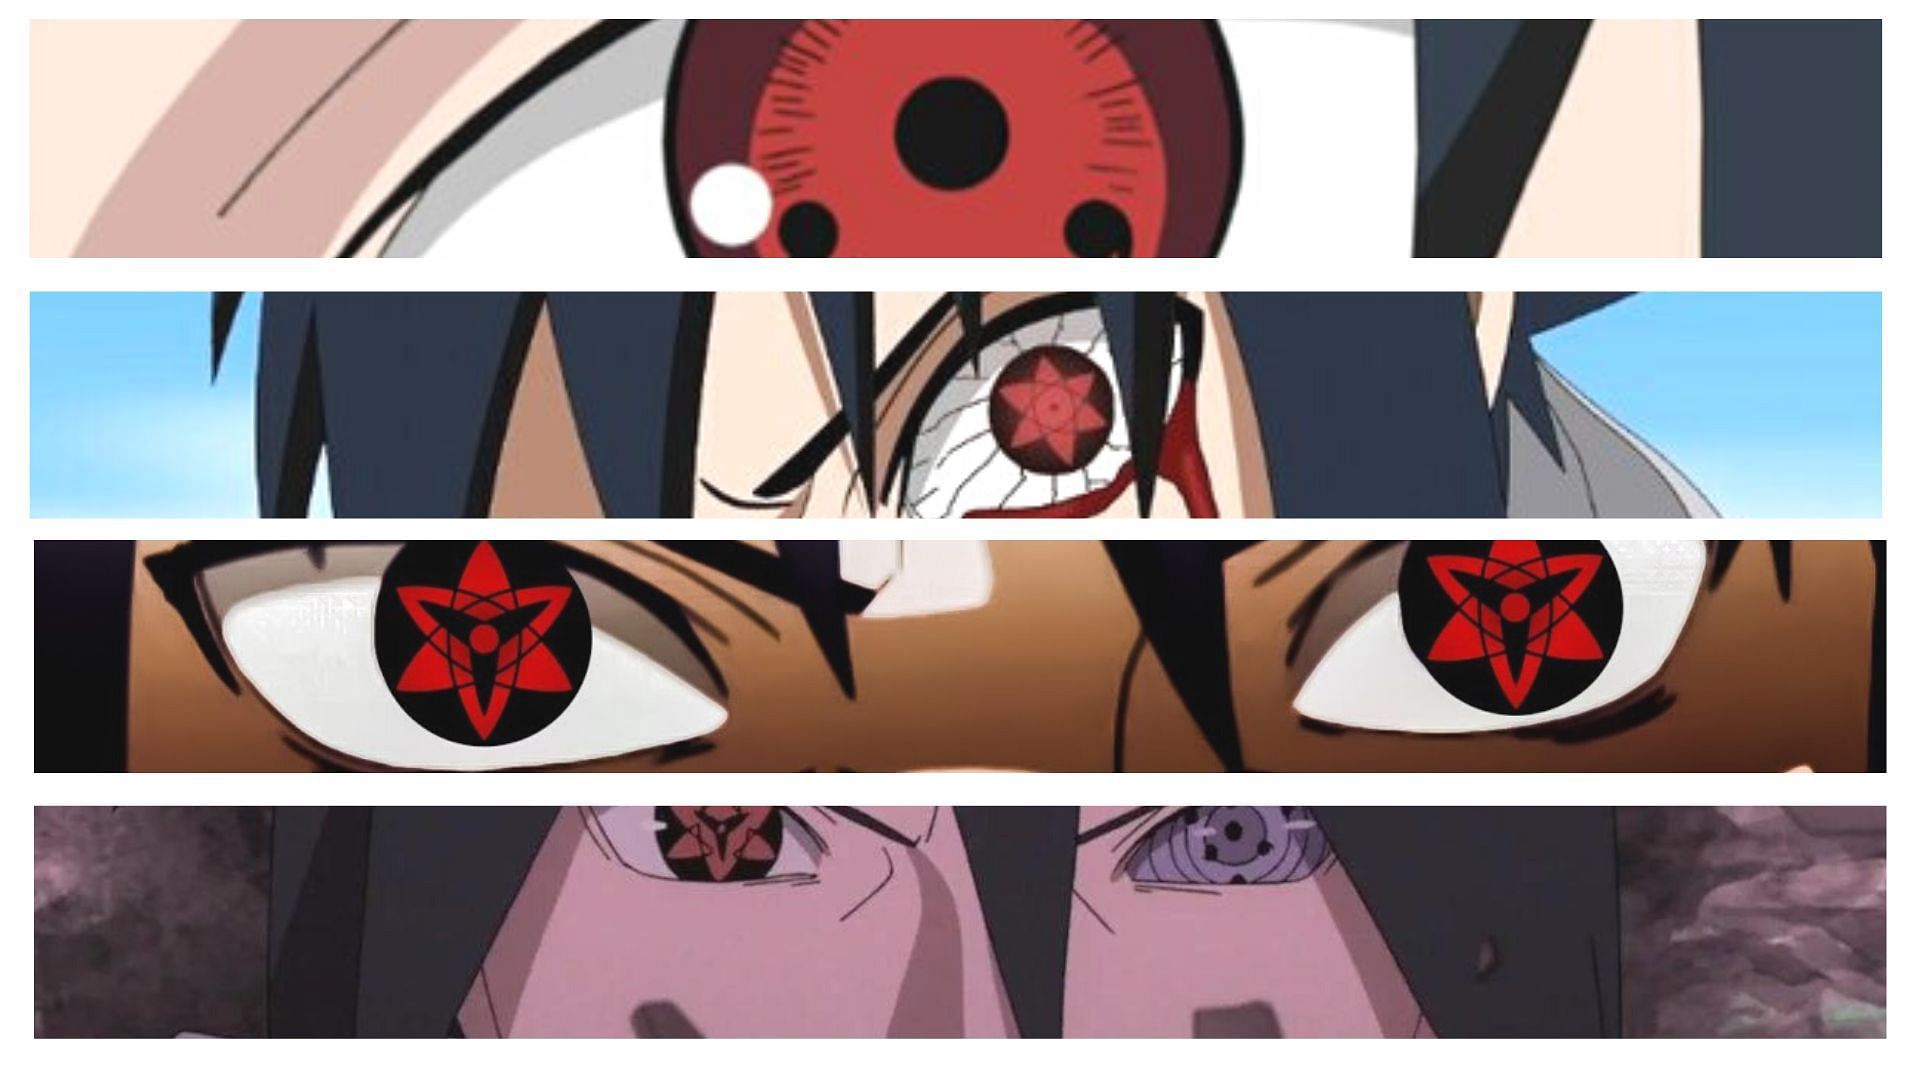 What Is the Curse Mark on Sasuke in 'Naruto'? Origin and Meaning, Explained